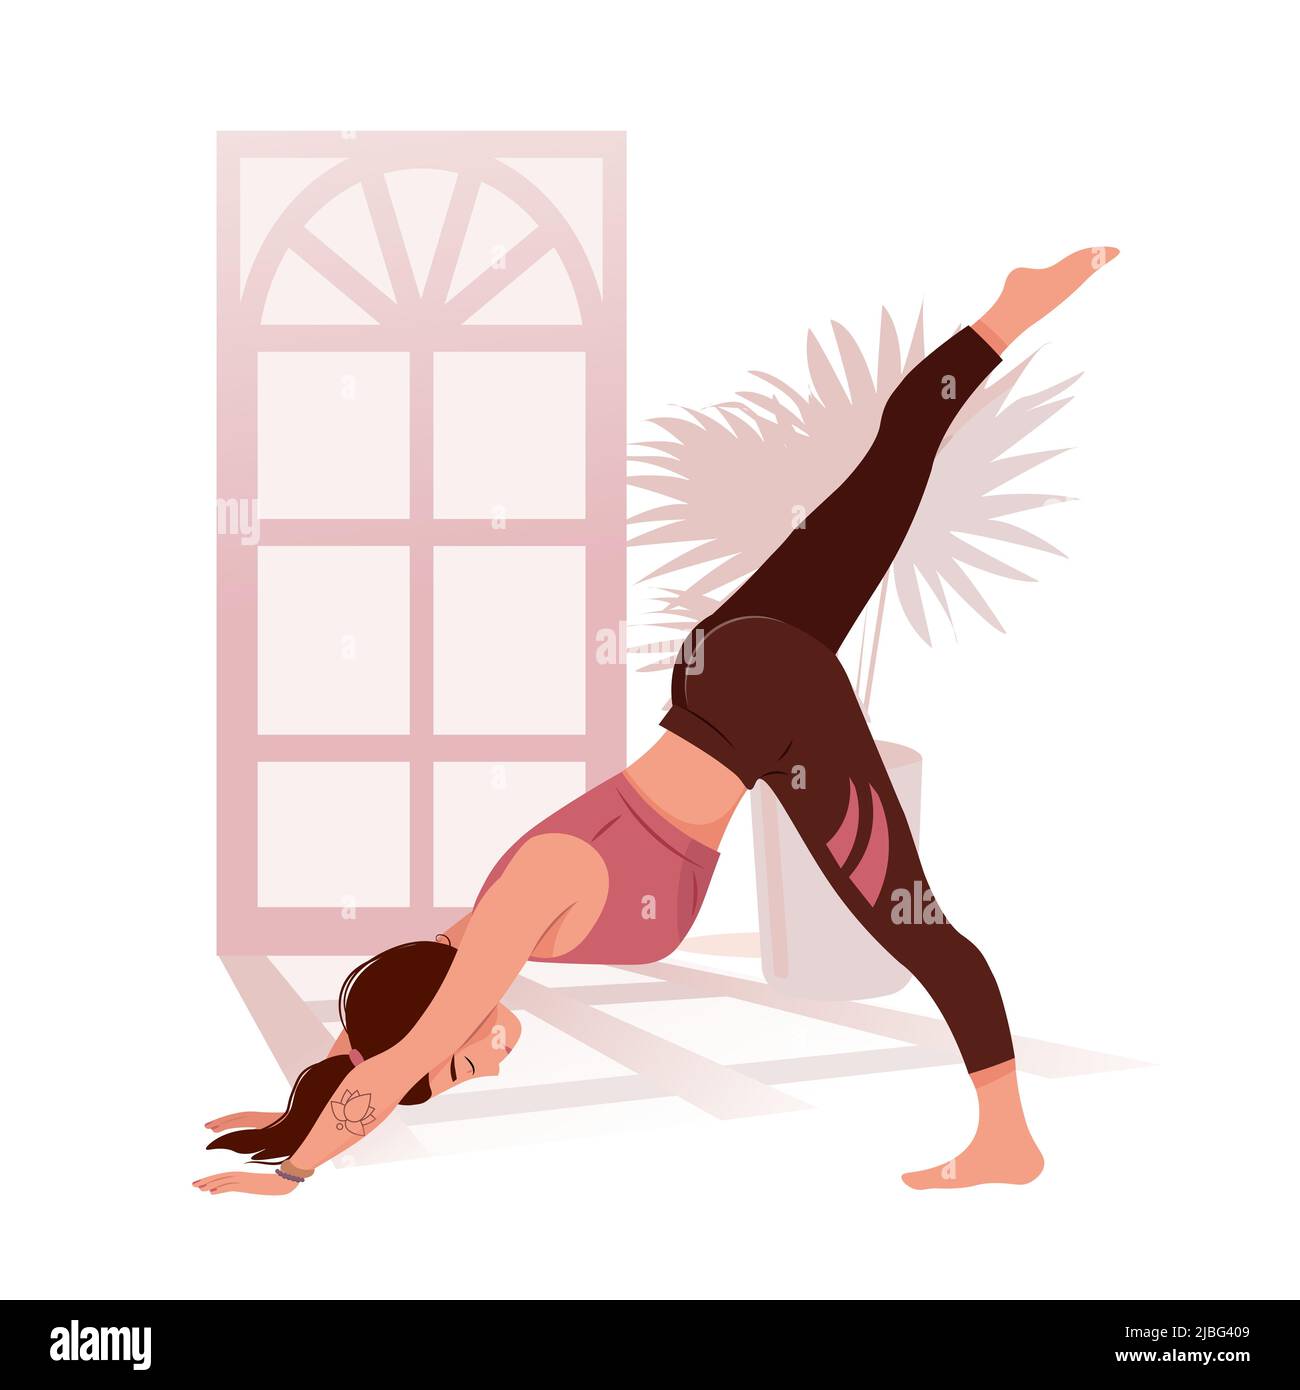 Woman practicing yoga, different poses. Healthy lifestyle. Woman with closed eyes stretching her body and meditating. Meditation practice. Zen and harmony concept. Vector illustration in flat style. Stock Vector